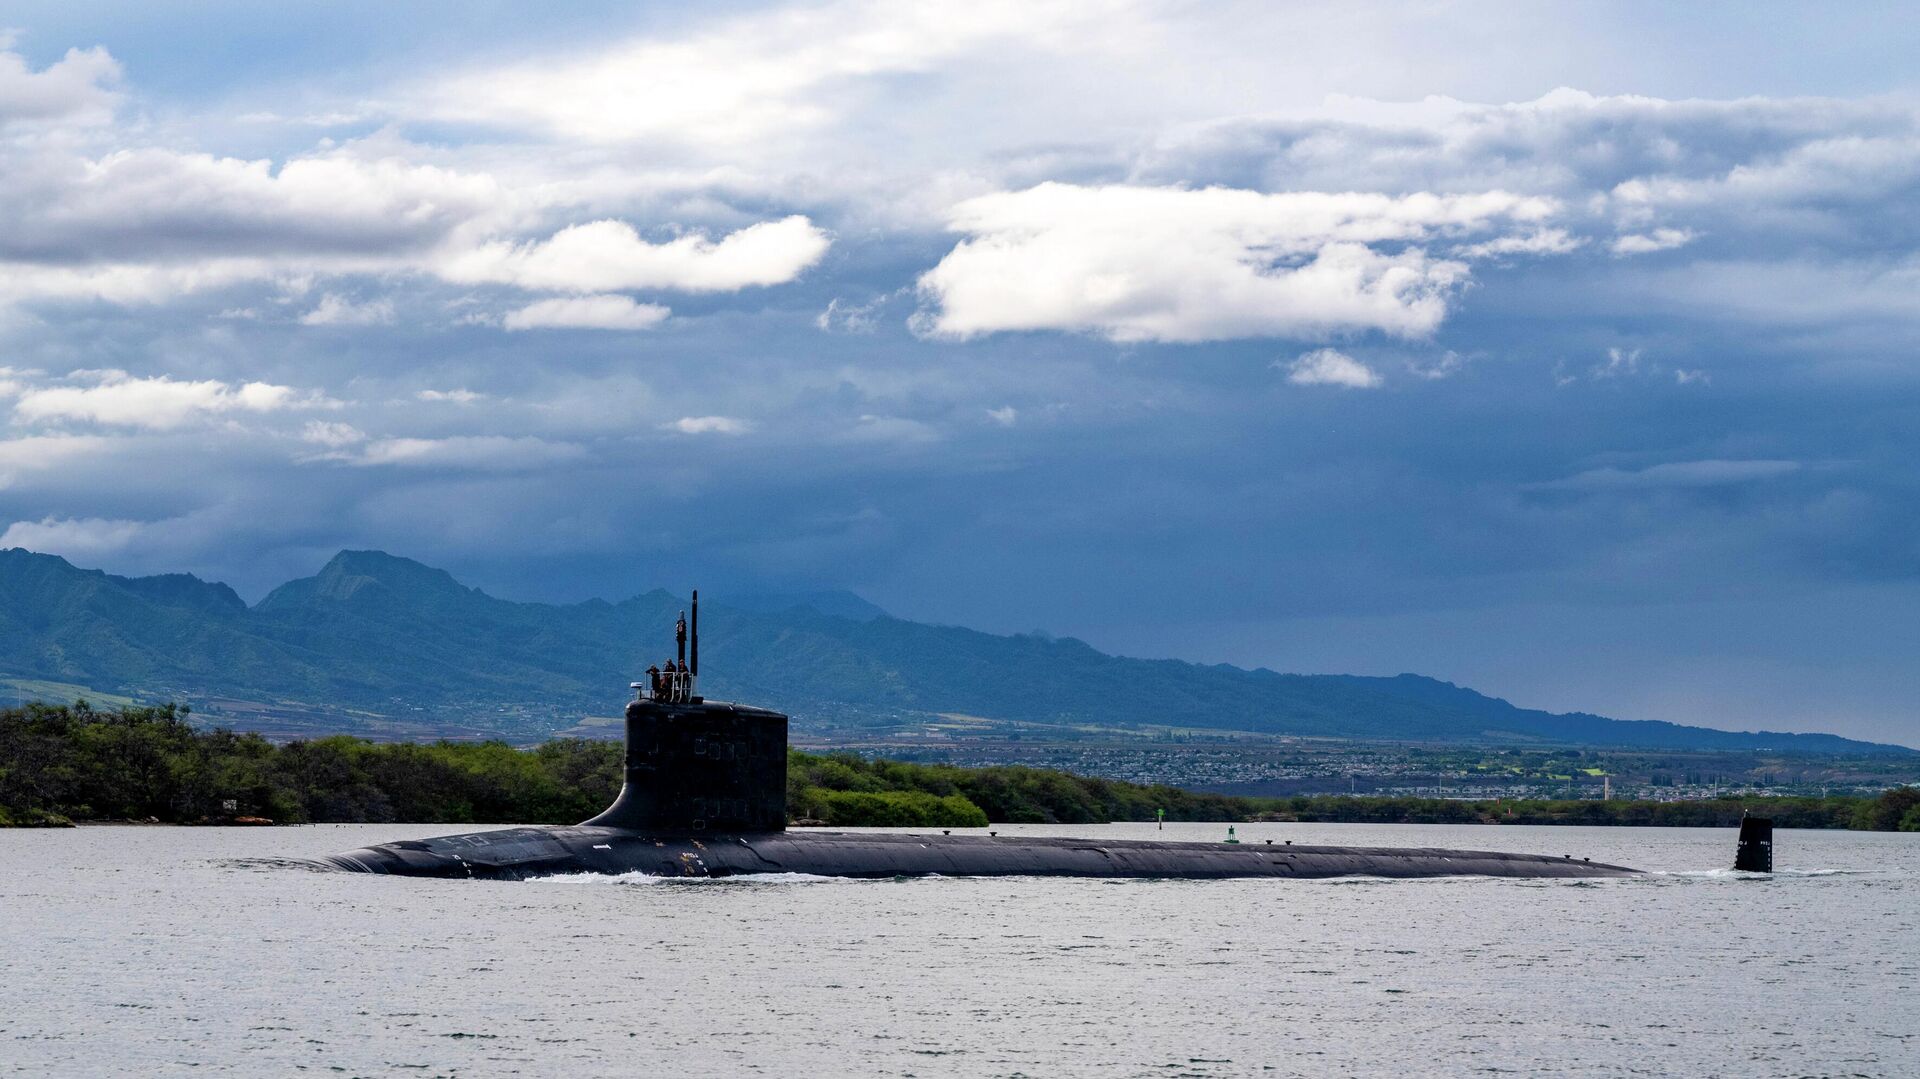 FILE - In this file photo provided by U.S. Navy, the Virginia-class fast-attack submarine USS Missouri (SSN 780) departs Joint Base Pearl Harbor-Hickam for a scheduled deployment in the 7th Fleet area of responsibility, Sept. 1, 2021. The foreign ministers of Malaysia and Indonesia expressed concern Monday, Oct. 18, 2021, that Australia’s plan to acquire nuclear-powered submarines from the U.S. in a security alliance may increase the rivalry of major powers in Southeast Asia - Sputnik International, 1920, 01.08.2022